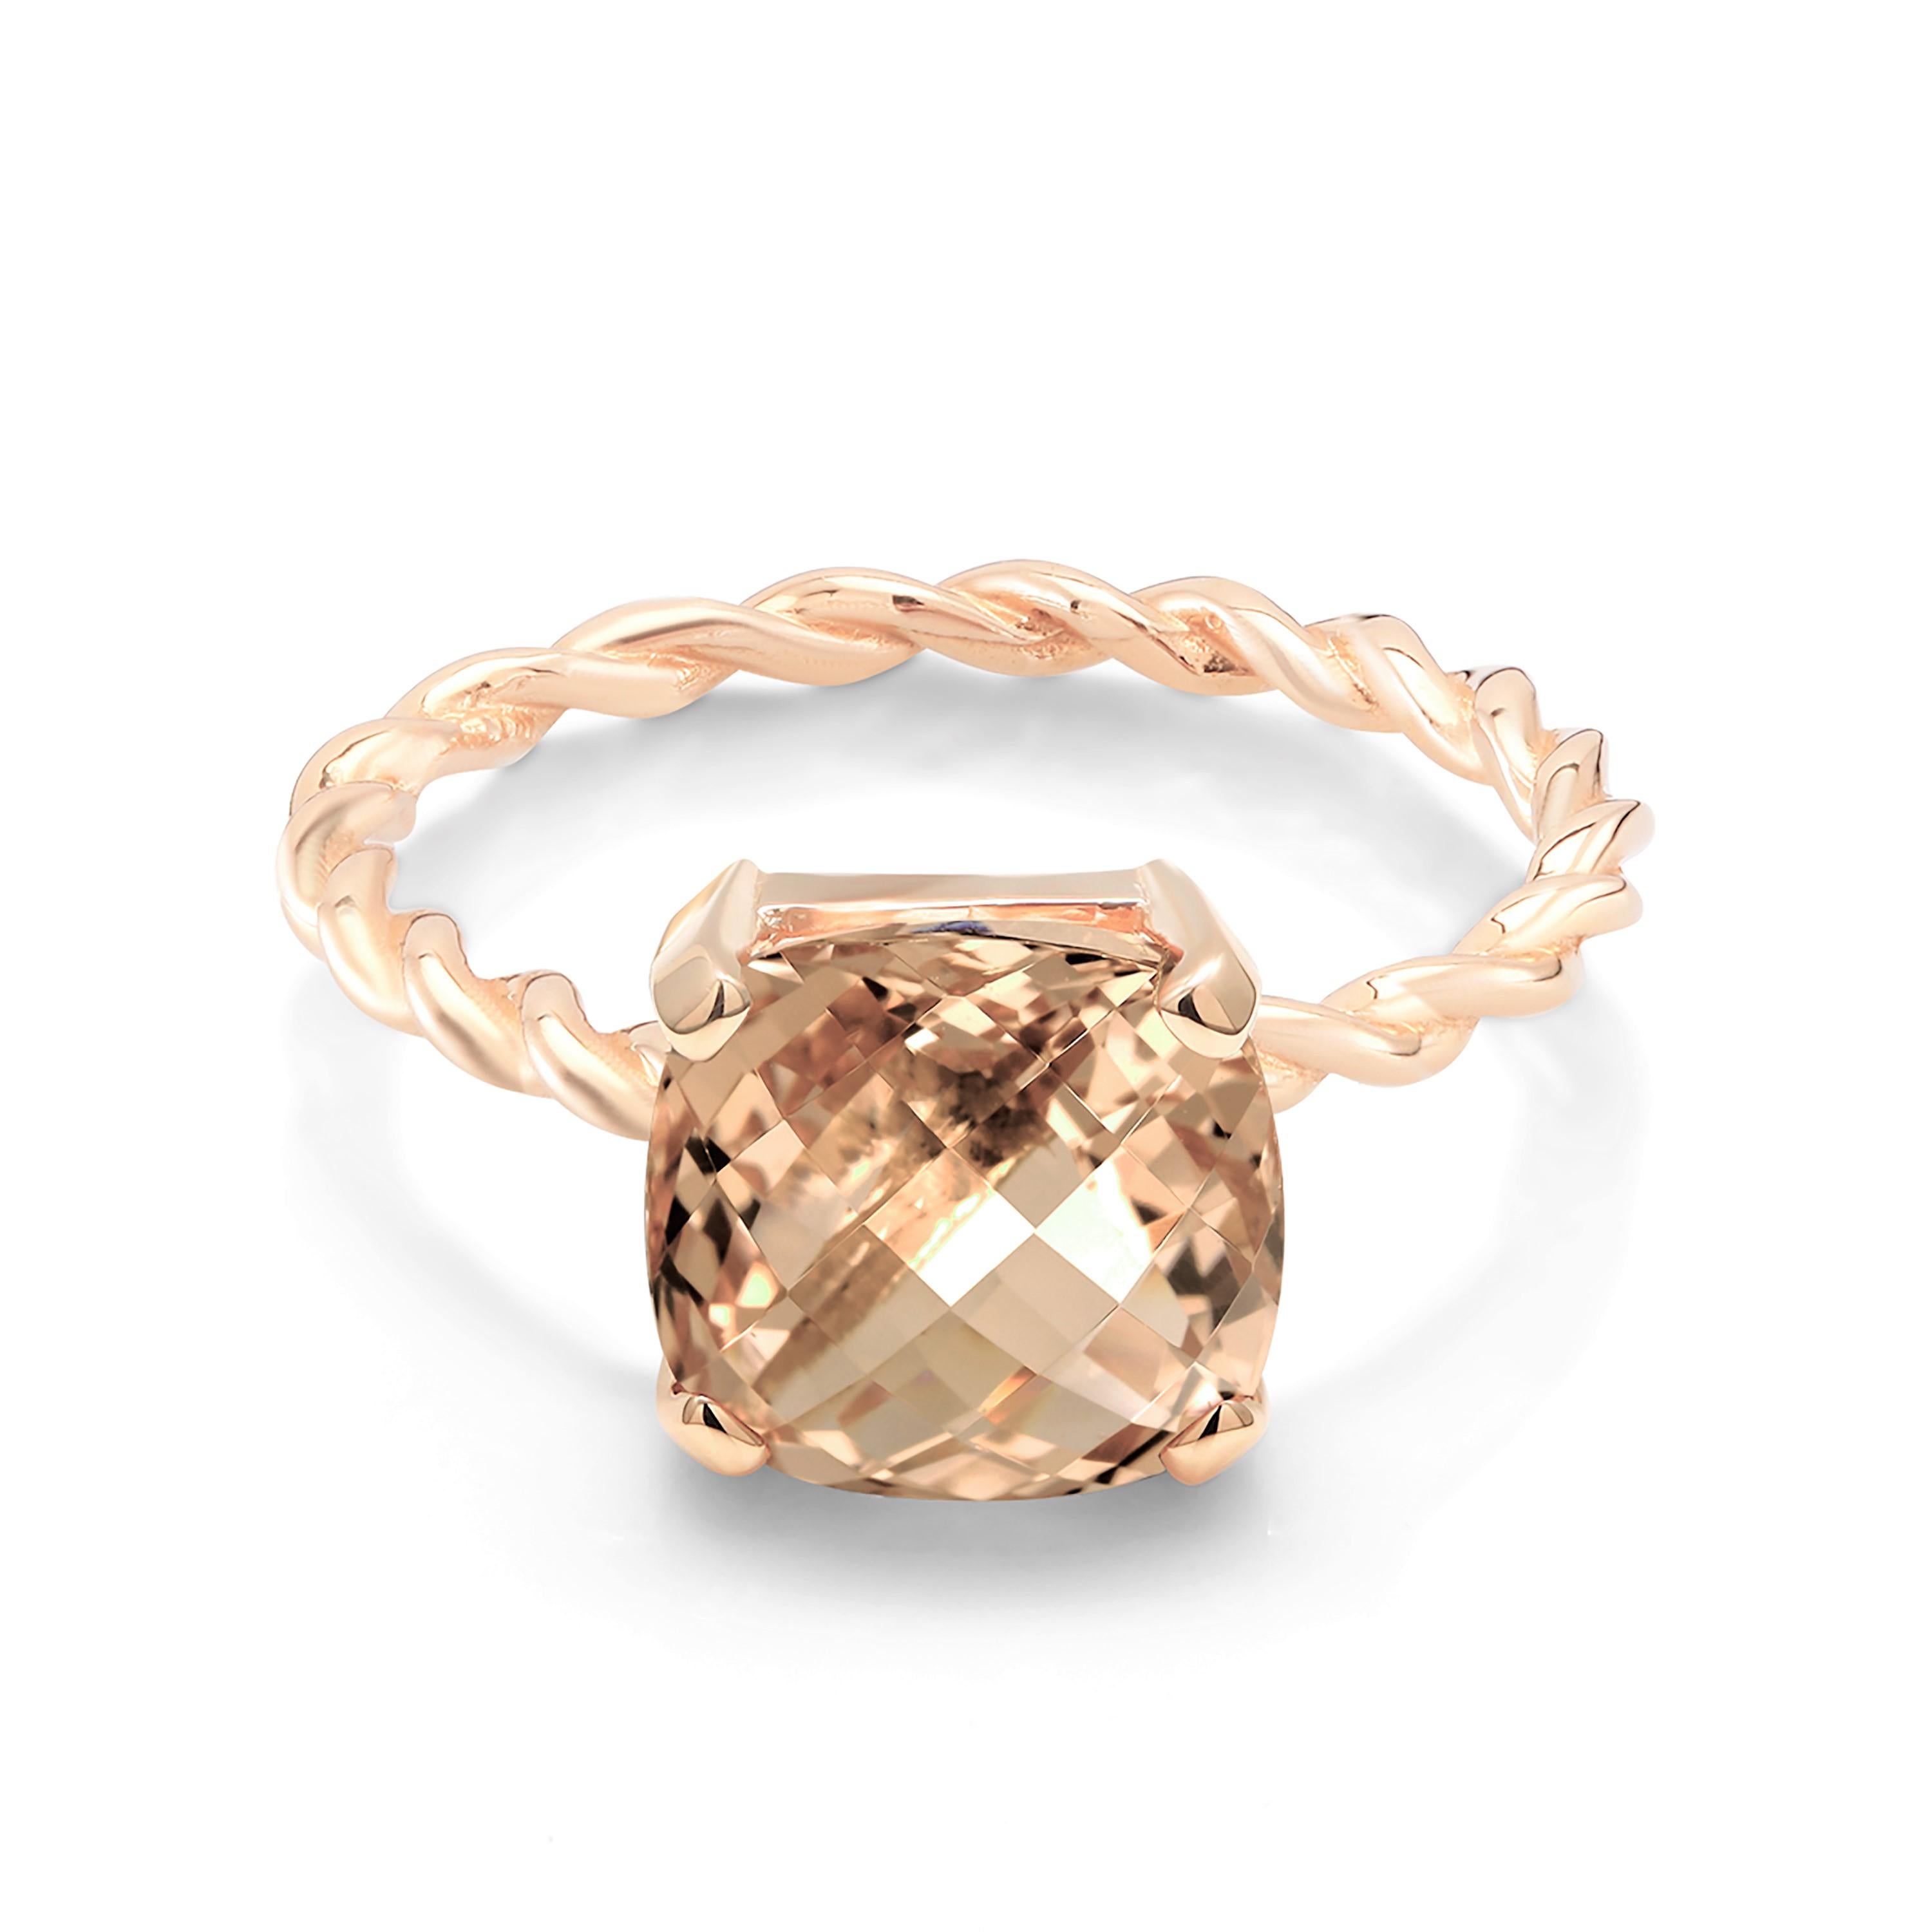 14k karats yellow gold braided cocktail ring 
Cushion shape morganite weighing 3.60 carat 
Ring finger size 6 In Stock
New Ring
The ring cannot be resized
Handmade in the USA
Our team of graduate gemologists carefully hand-select every diamond and